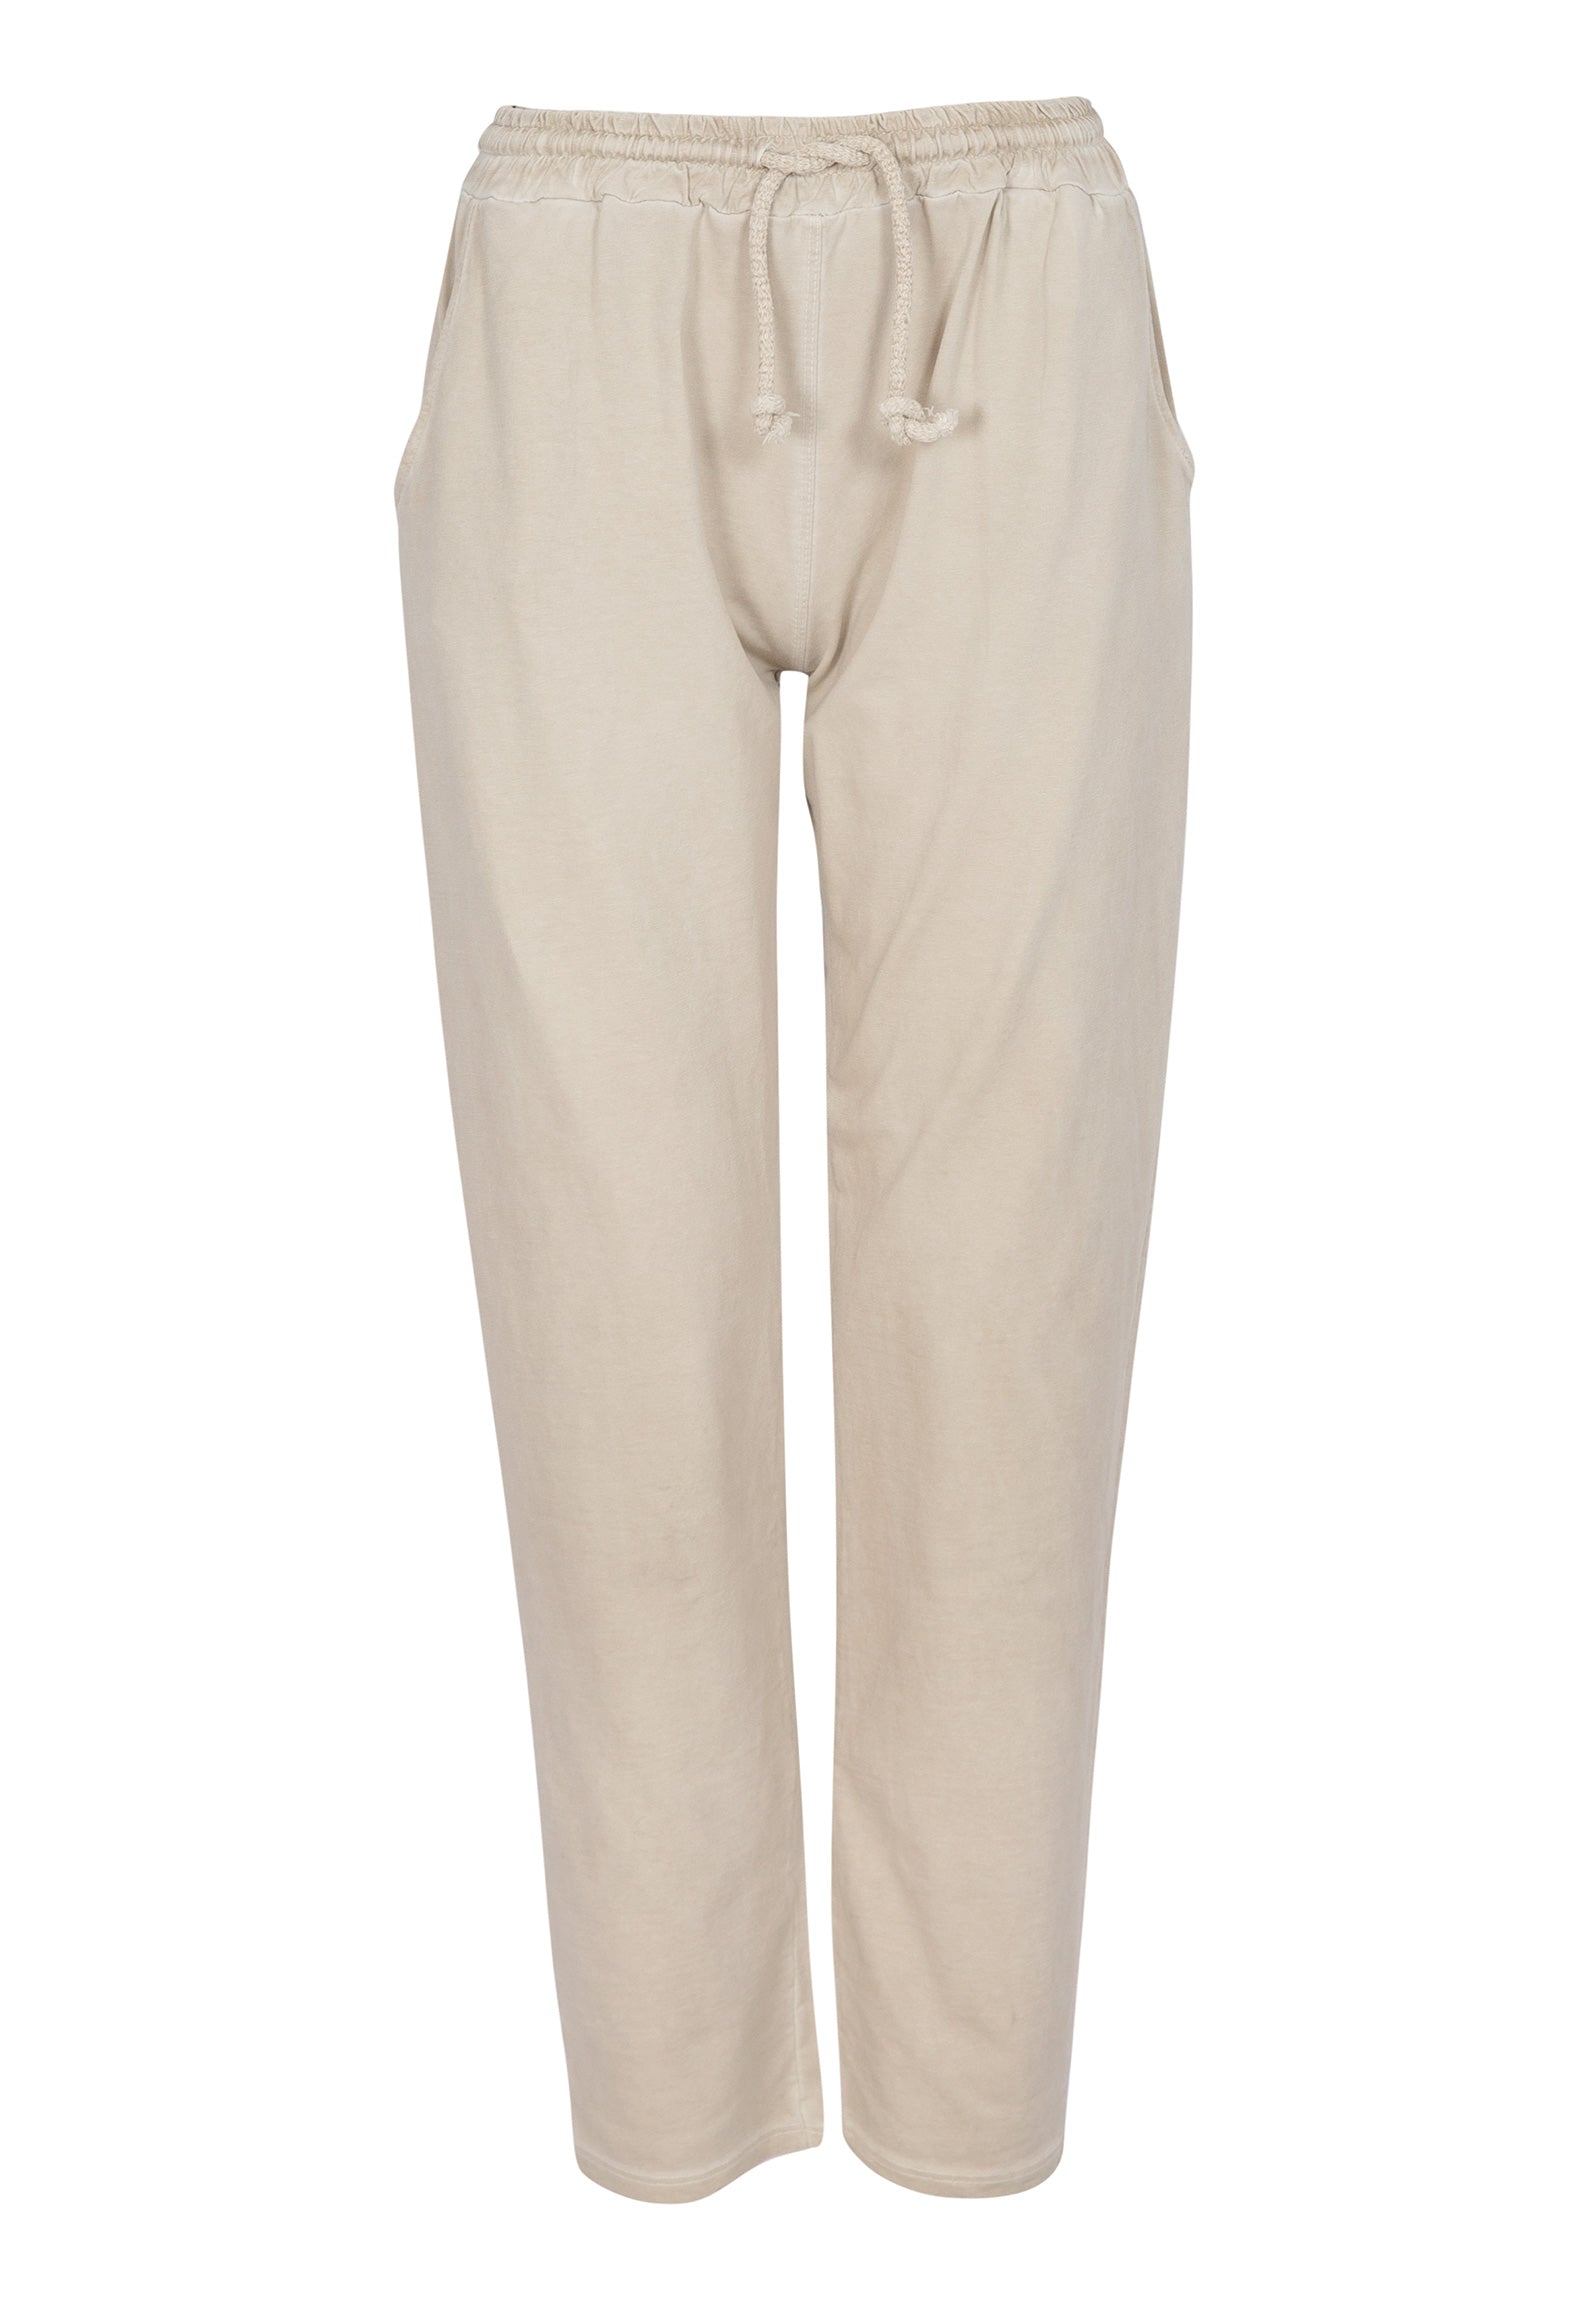 Women’s Neutrals Rya Pant Beige Extra Large By Ridley